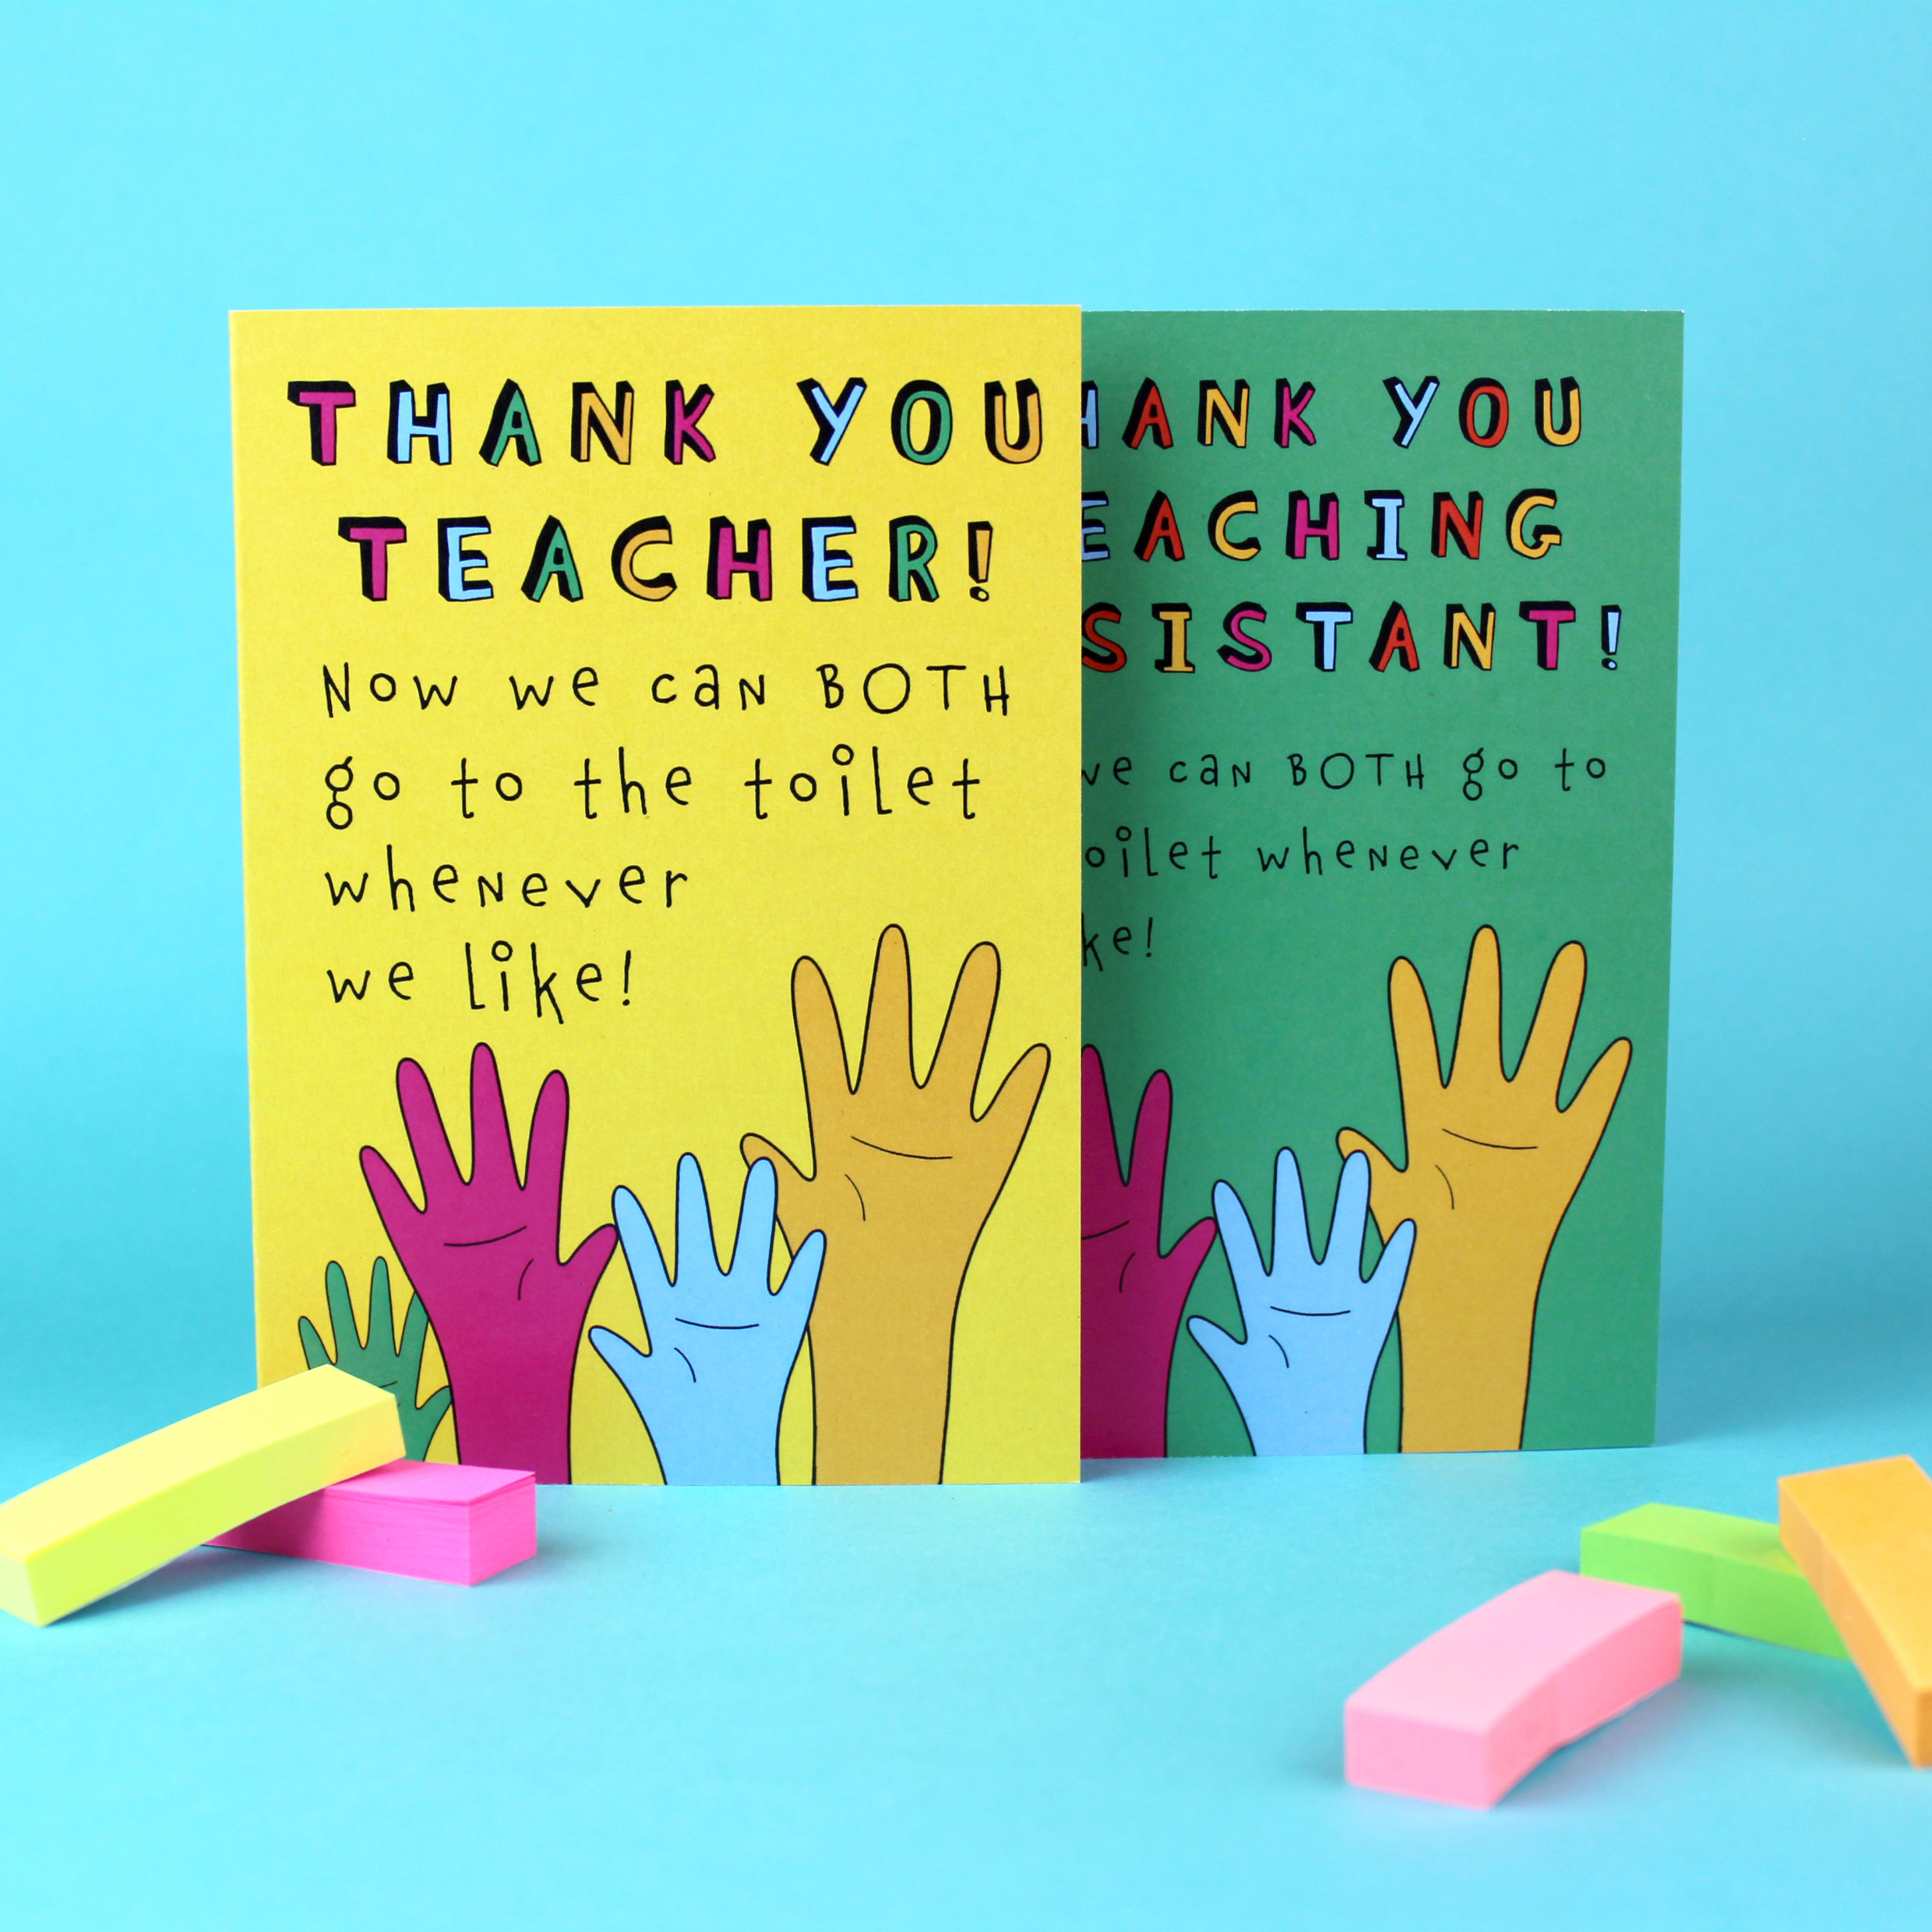 Two greetings cards are shown: one with a green background and one with a yellow background. Both have an illustration of raised hands of various colours. The yellow card reads Thank You Teacher now we can both go to the toilet whenever we like!. The green card says the same, but for a Teaching Assistant.